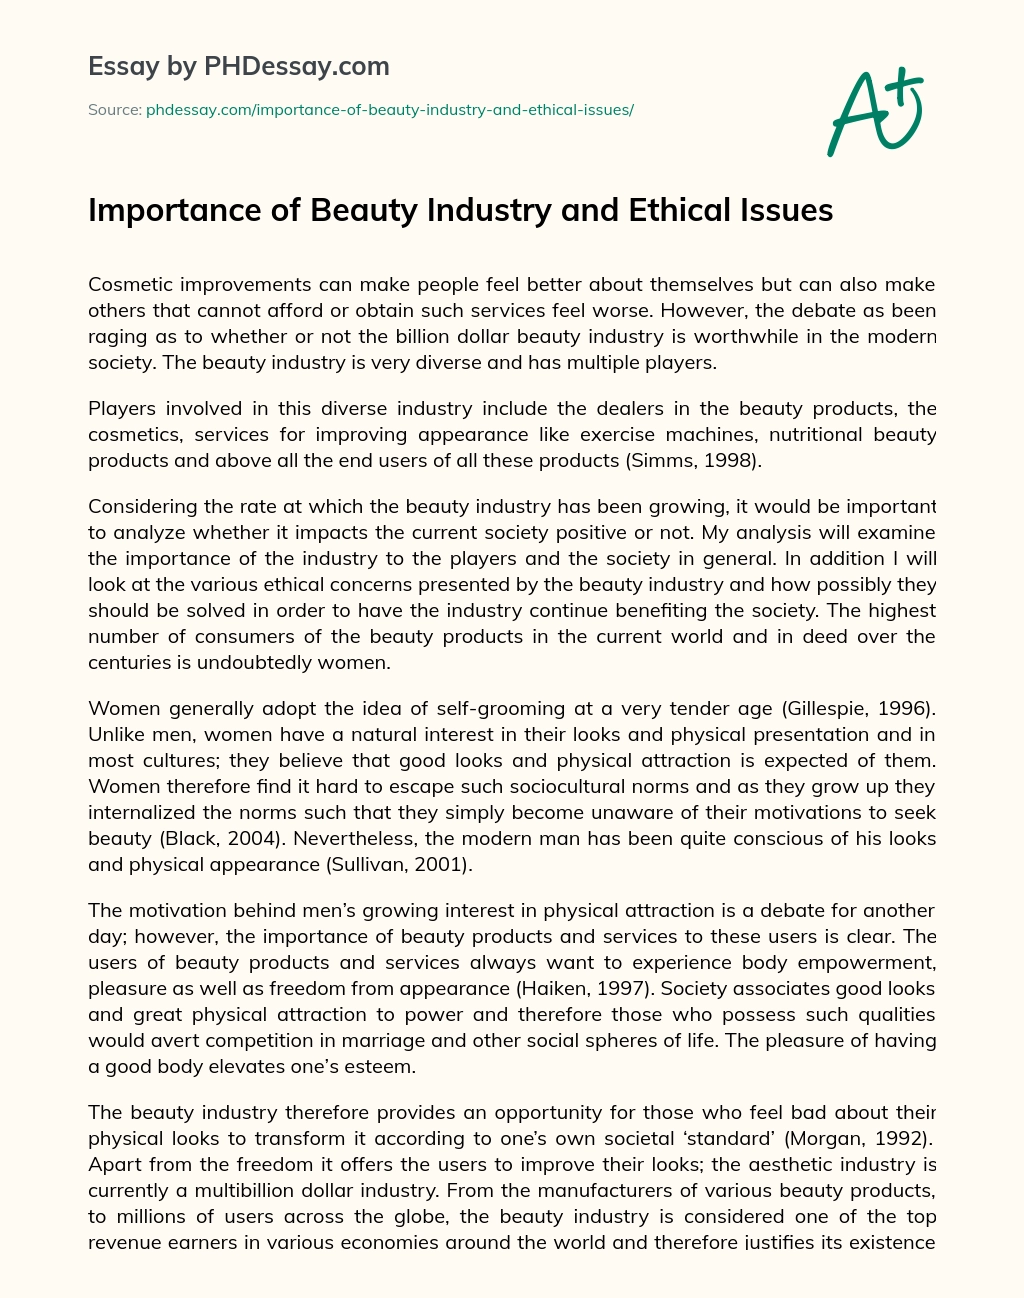 Importance of Beauty Industry and Ethical Issues essay